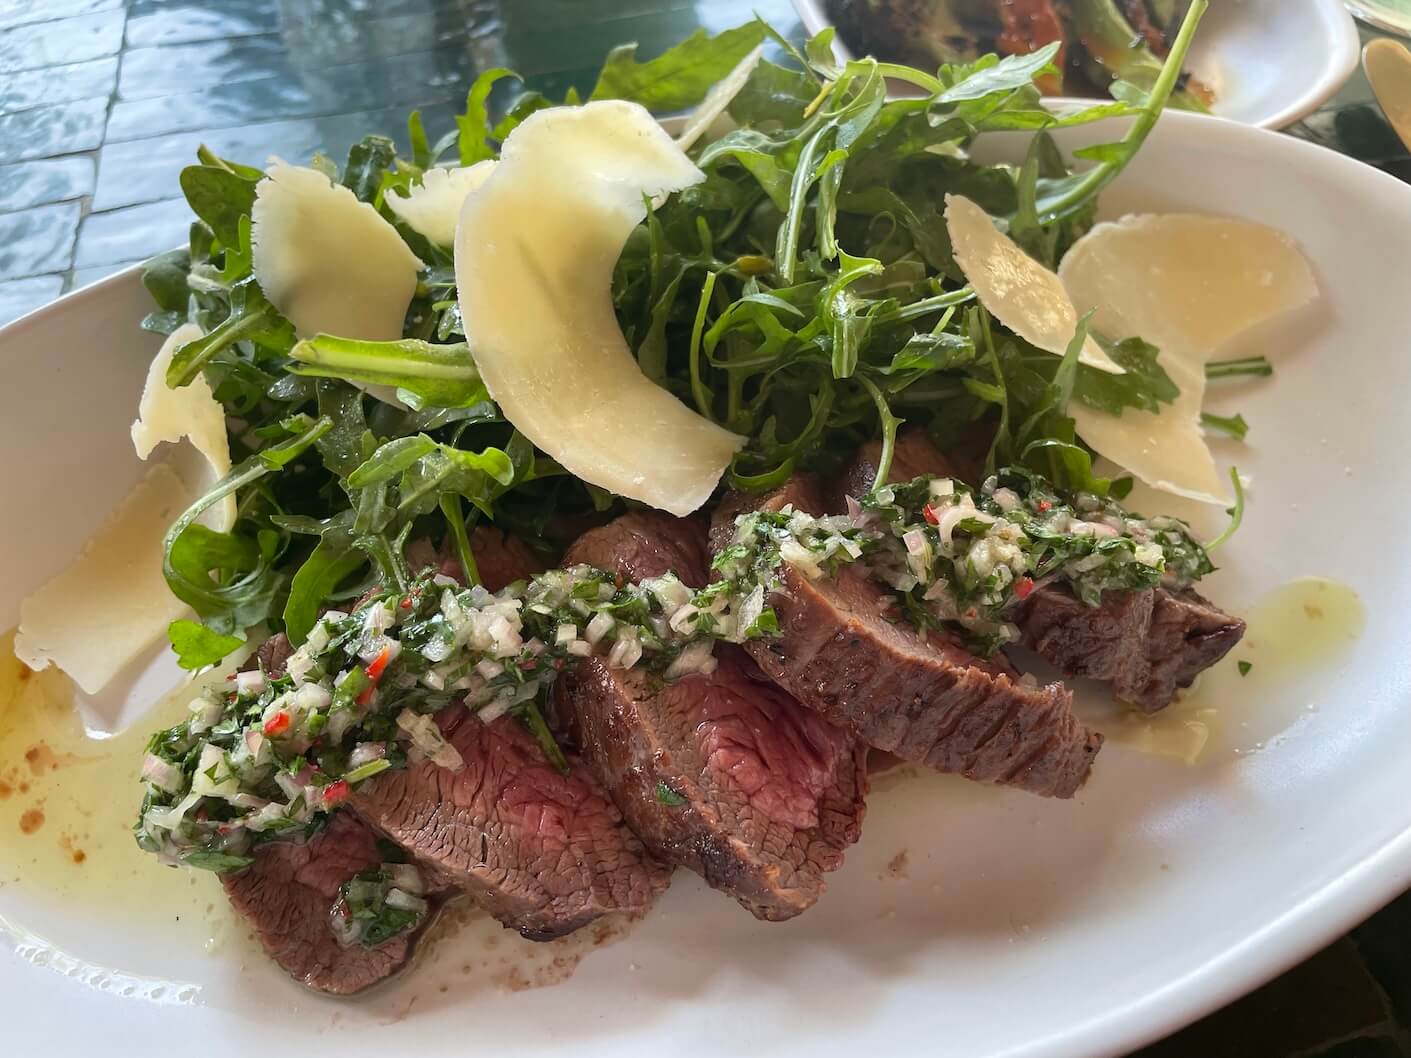 My delicious steak and rocket salad